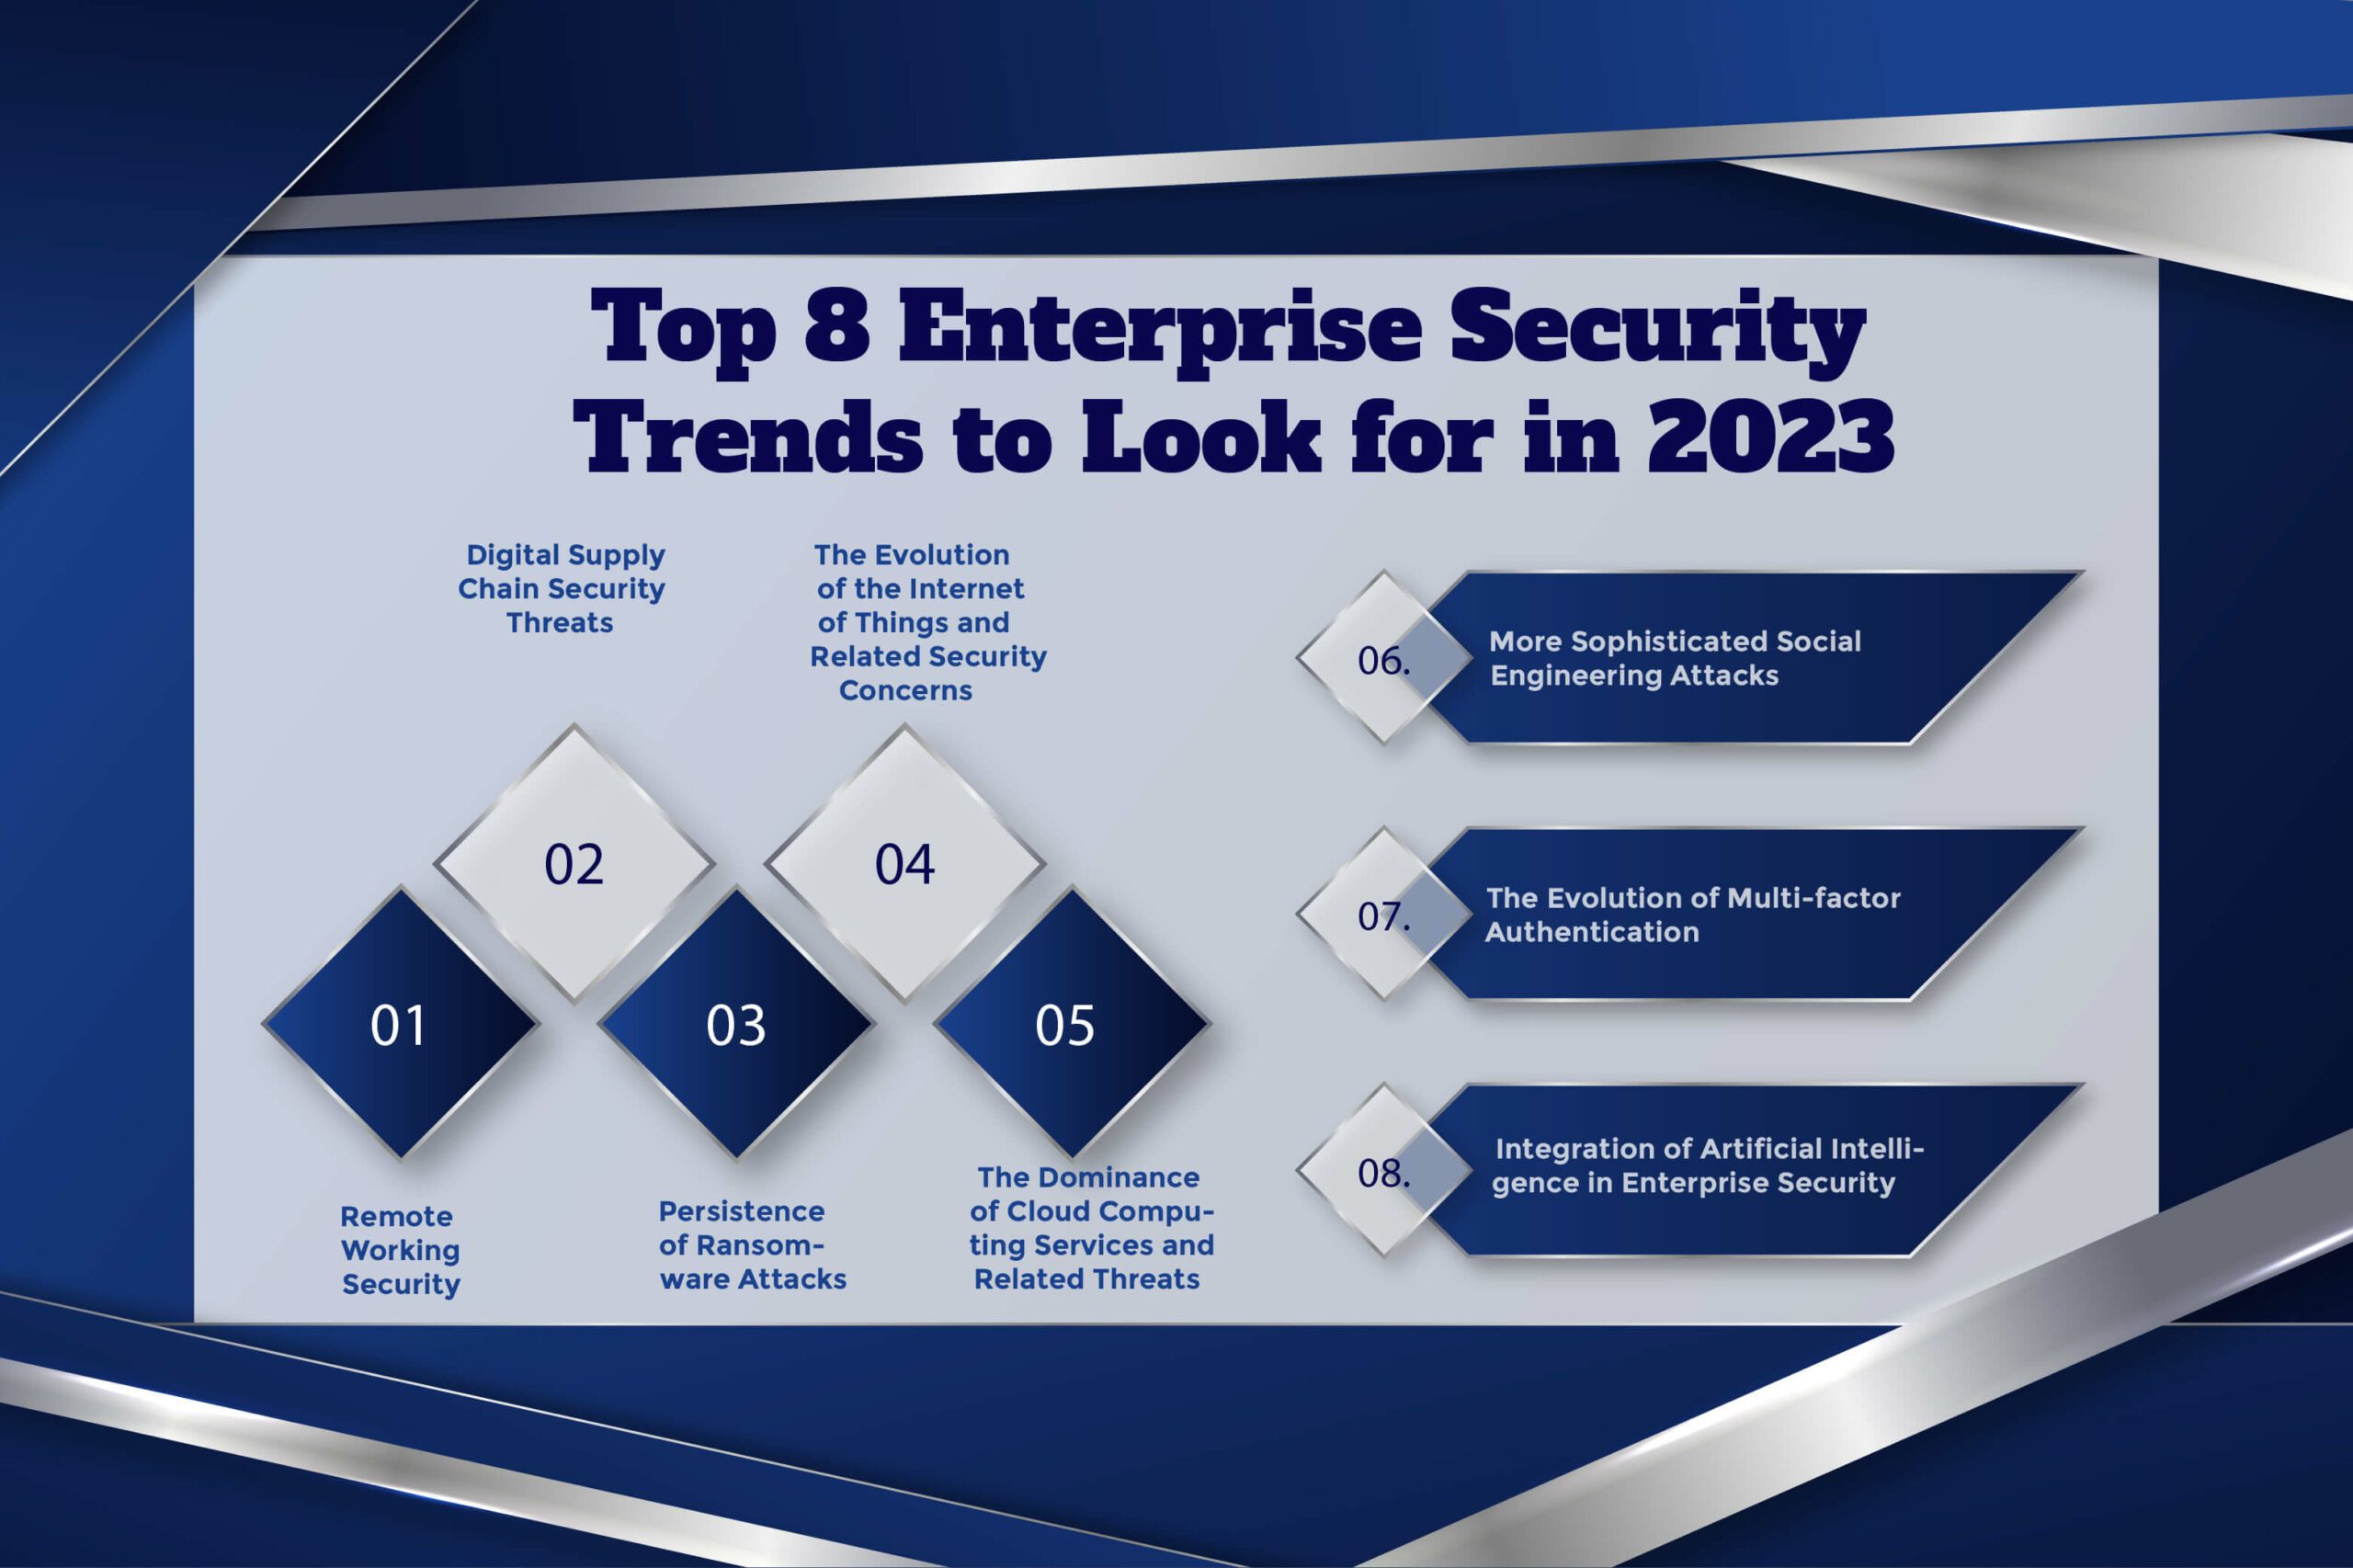 Top 8 Enterprise Security Trends to Look for in 2023